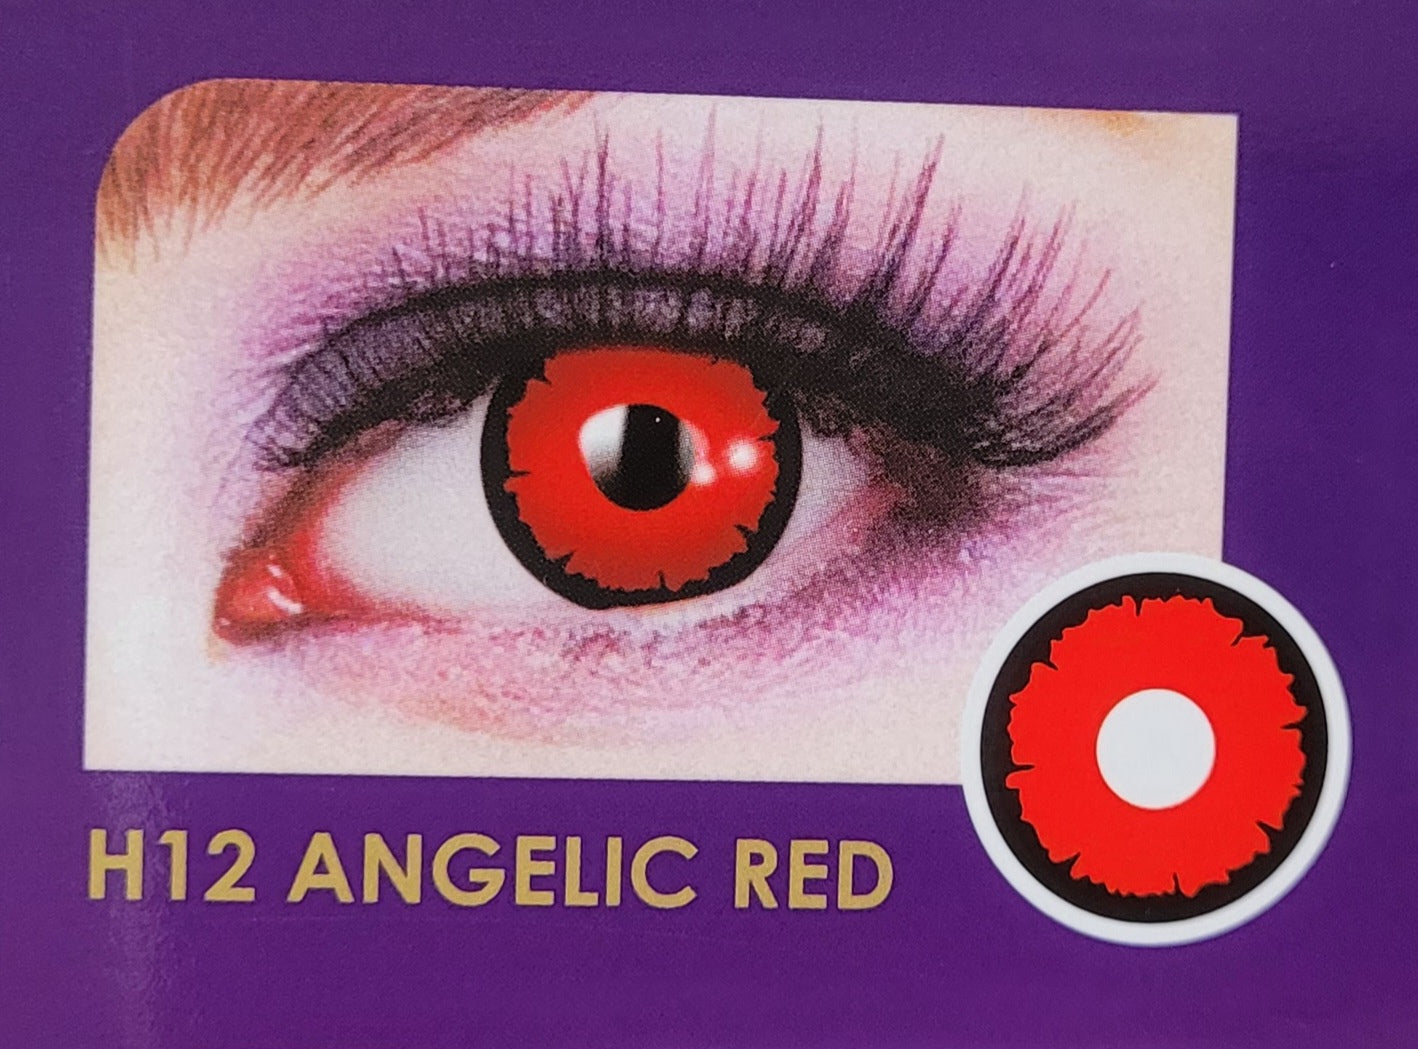 Angelic Red Contacts